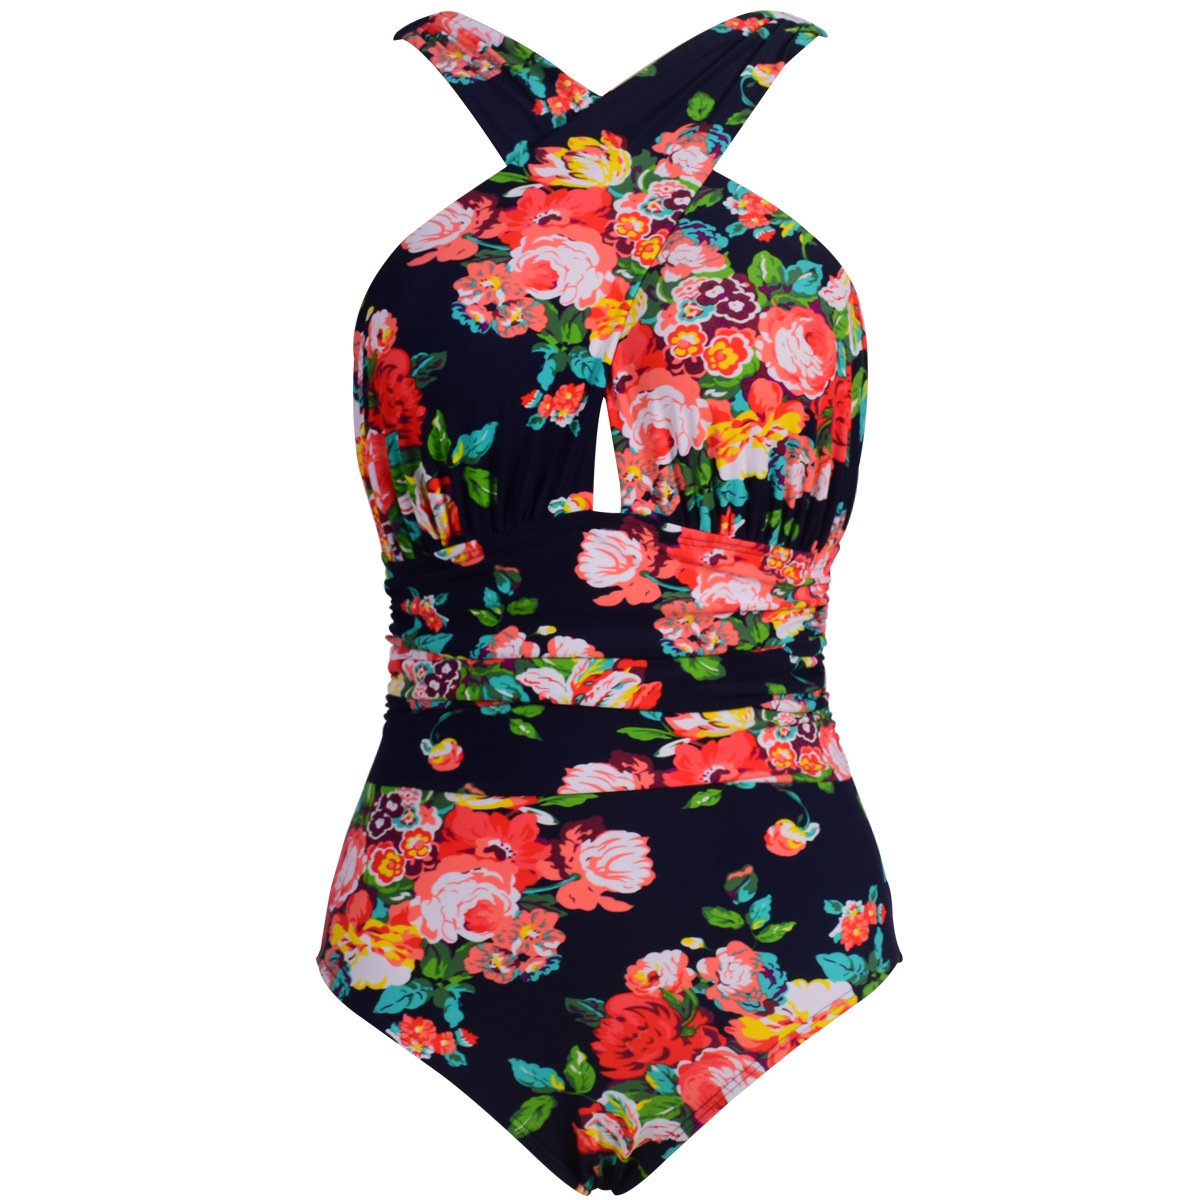 Plus Size Women One Piece Halter Swimsuit-Red Flower-S-Free Shipping at meselling99